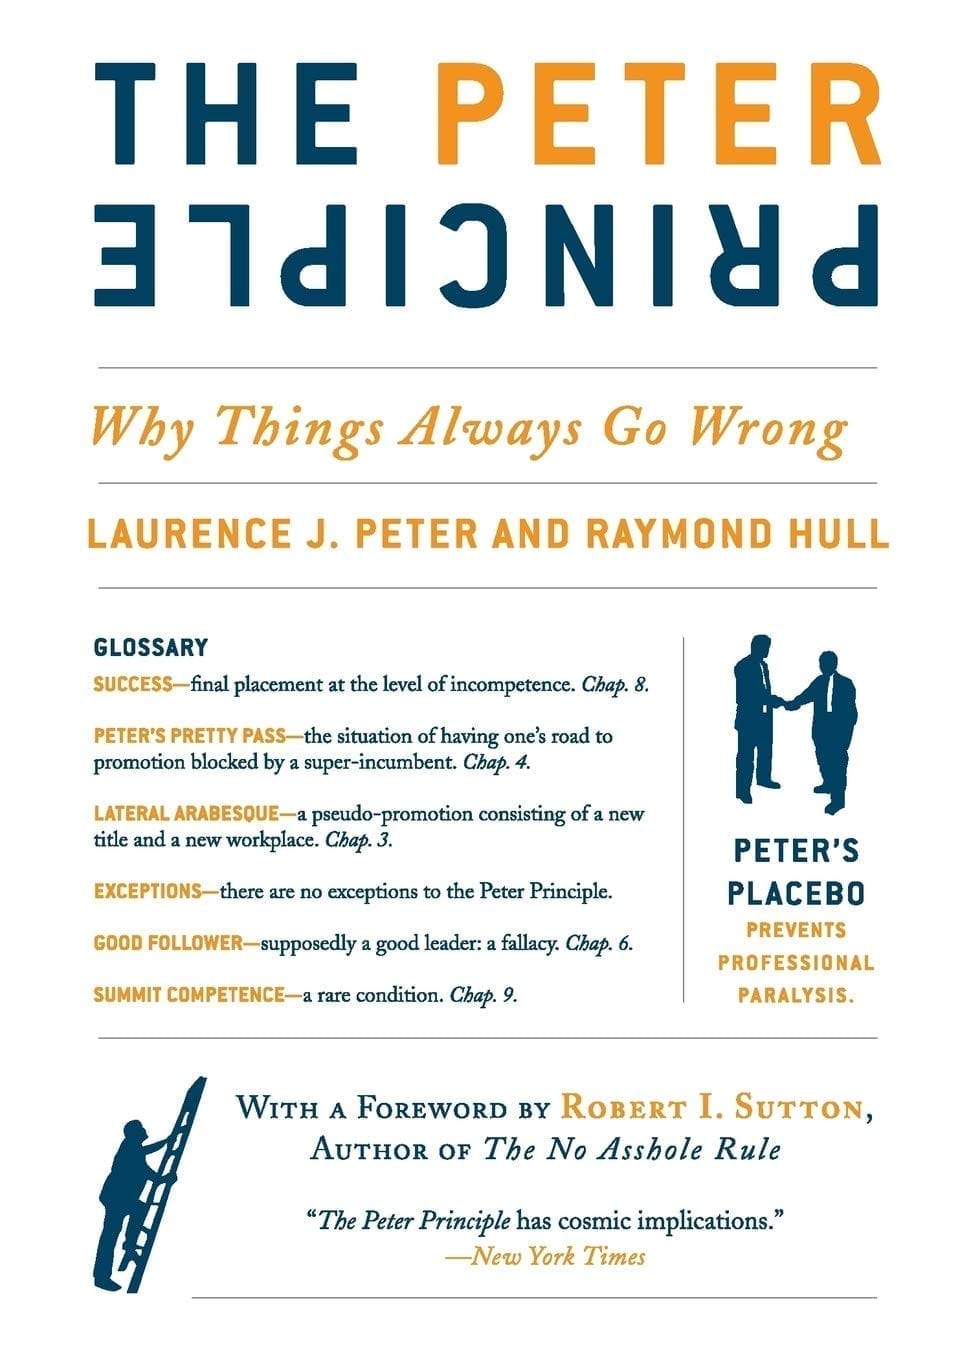 The Peter Principle Why Things Always Go Wrong by Laurence J Peter and Raymond Hull